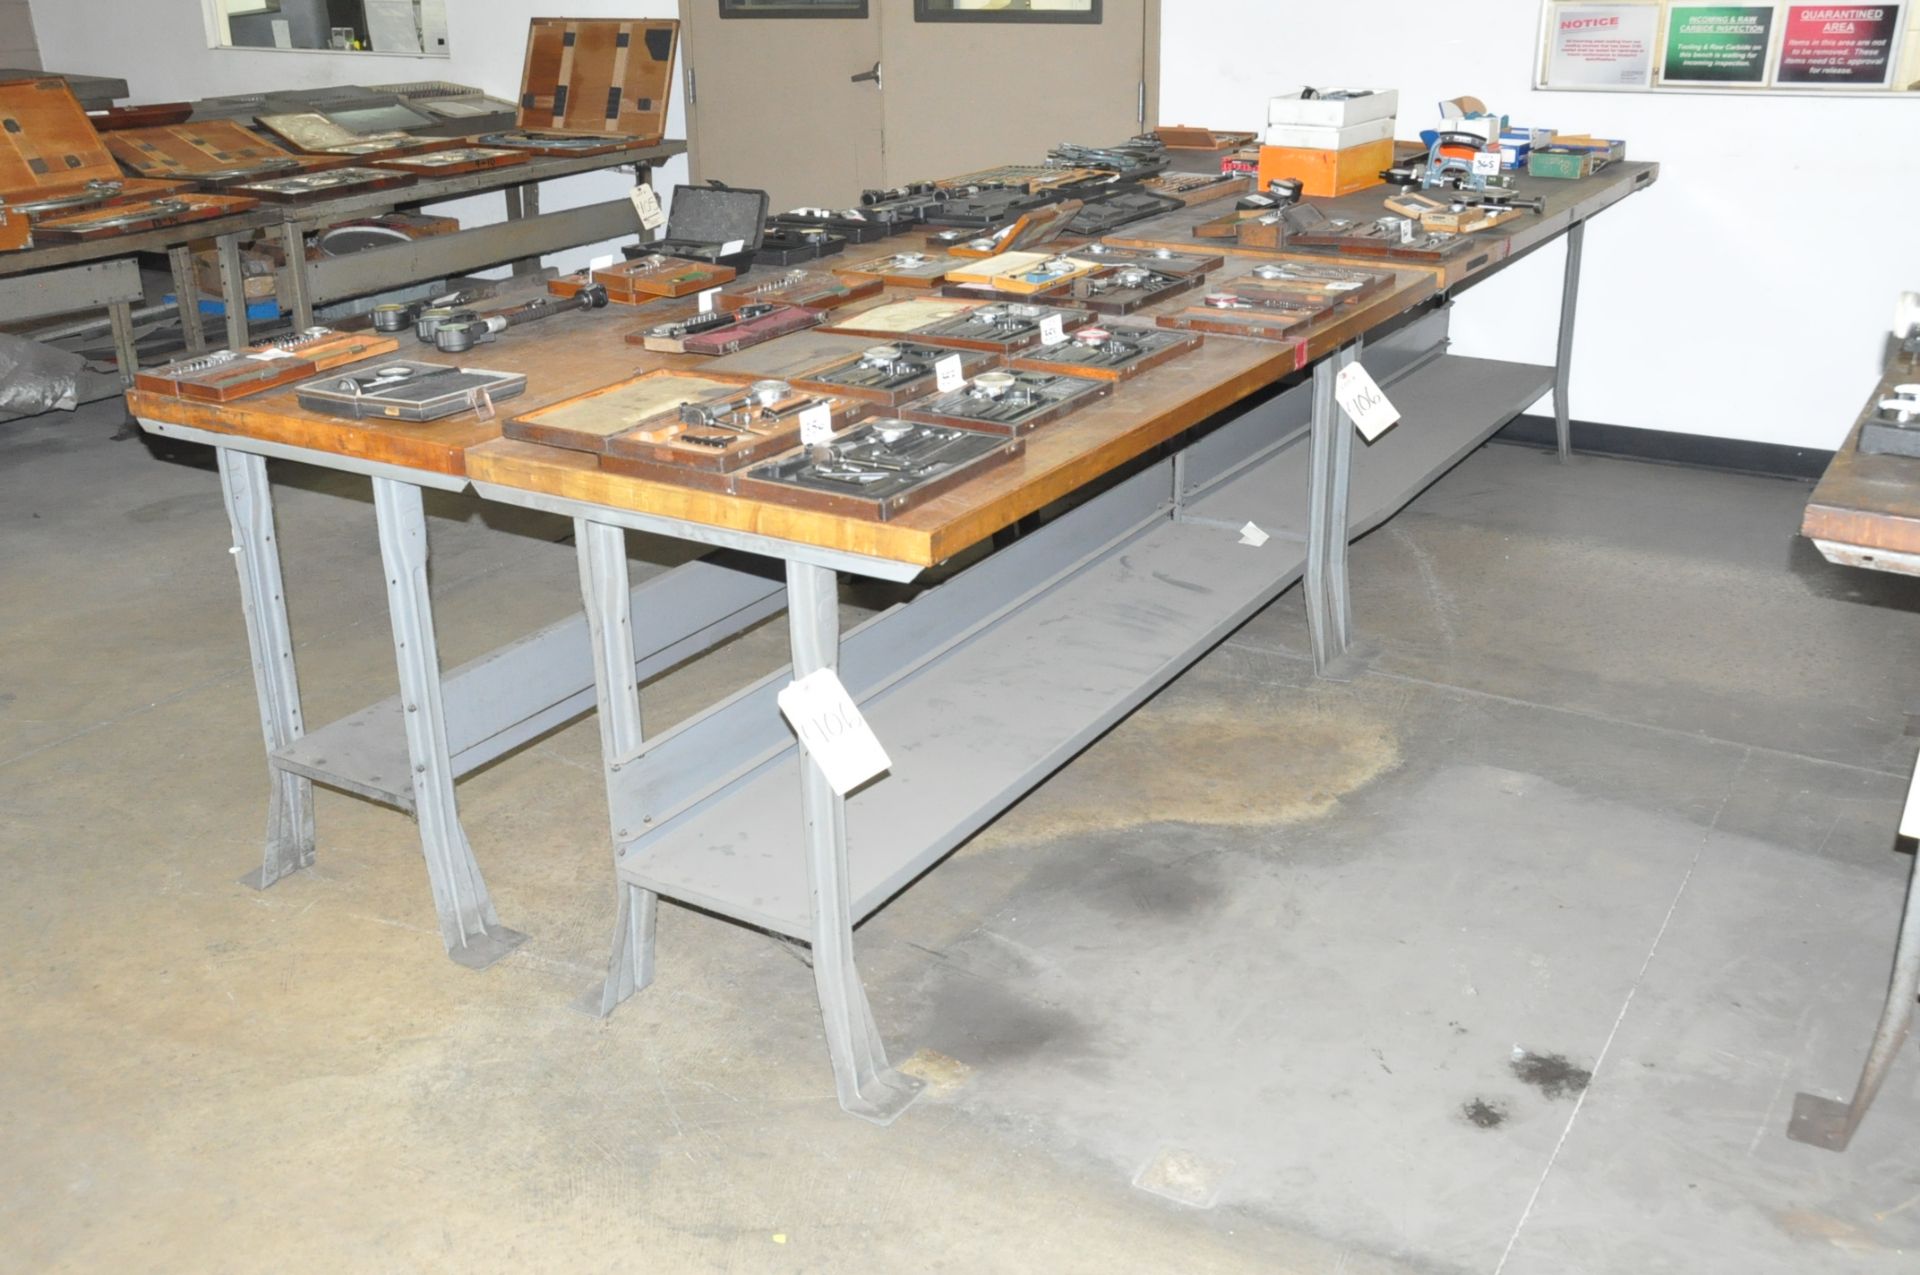 Lot-(4) Work Benches in (1) Group, (Contents Not Included), (Not to Be Removed Until Empty) - Image 2 of 2